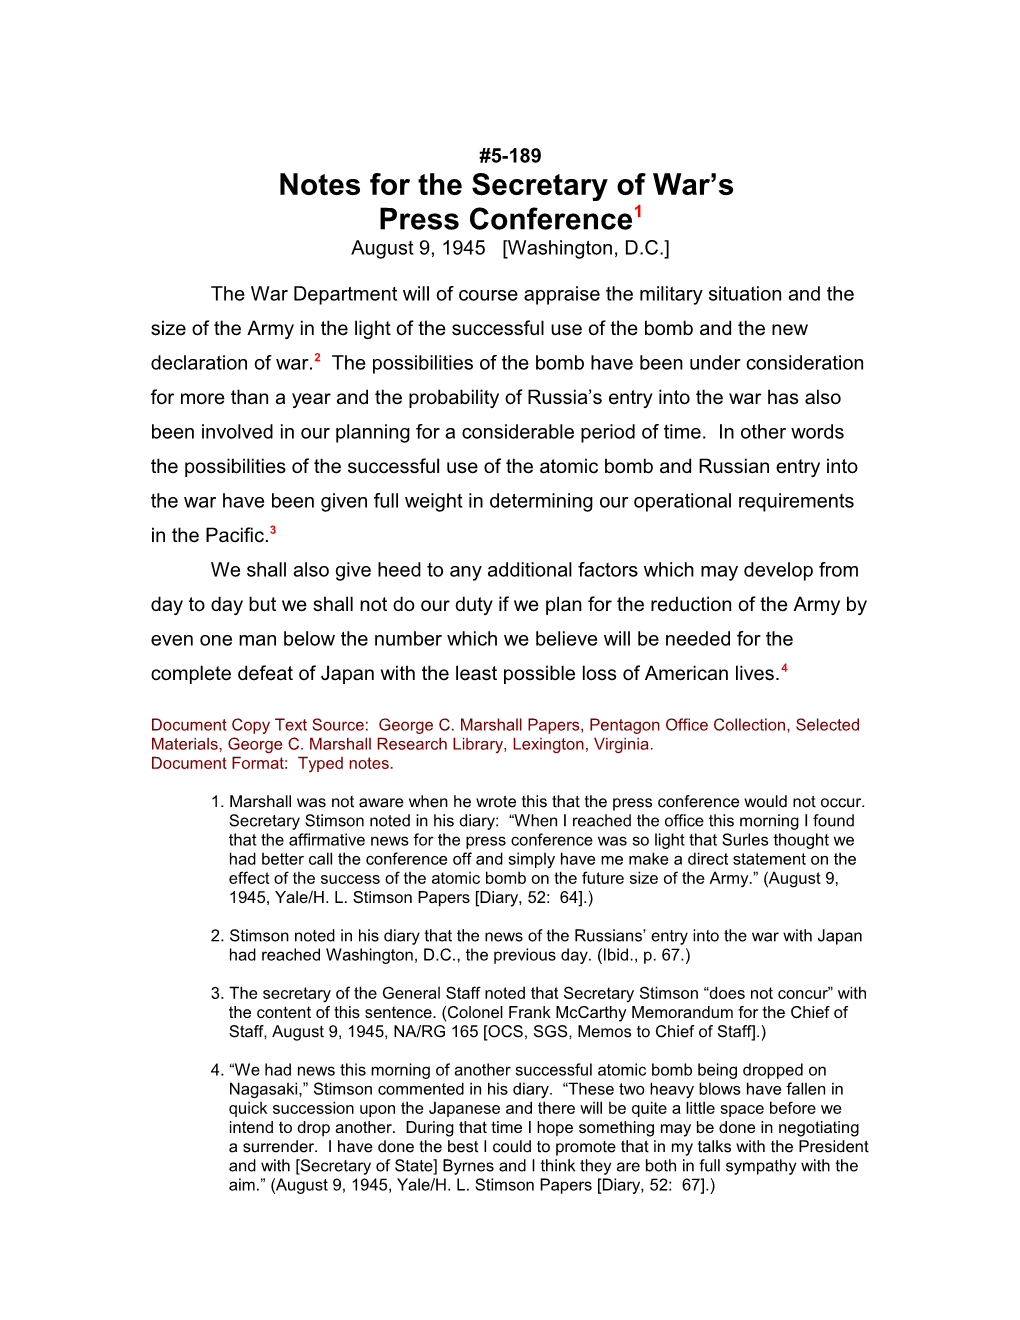 Notes for the Secretary of War S